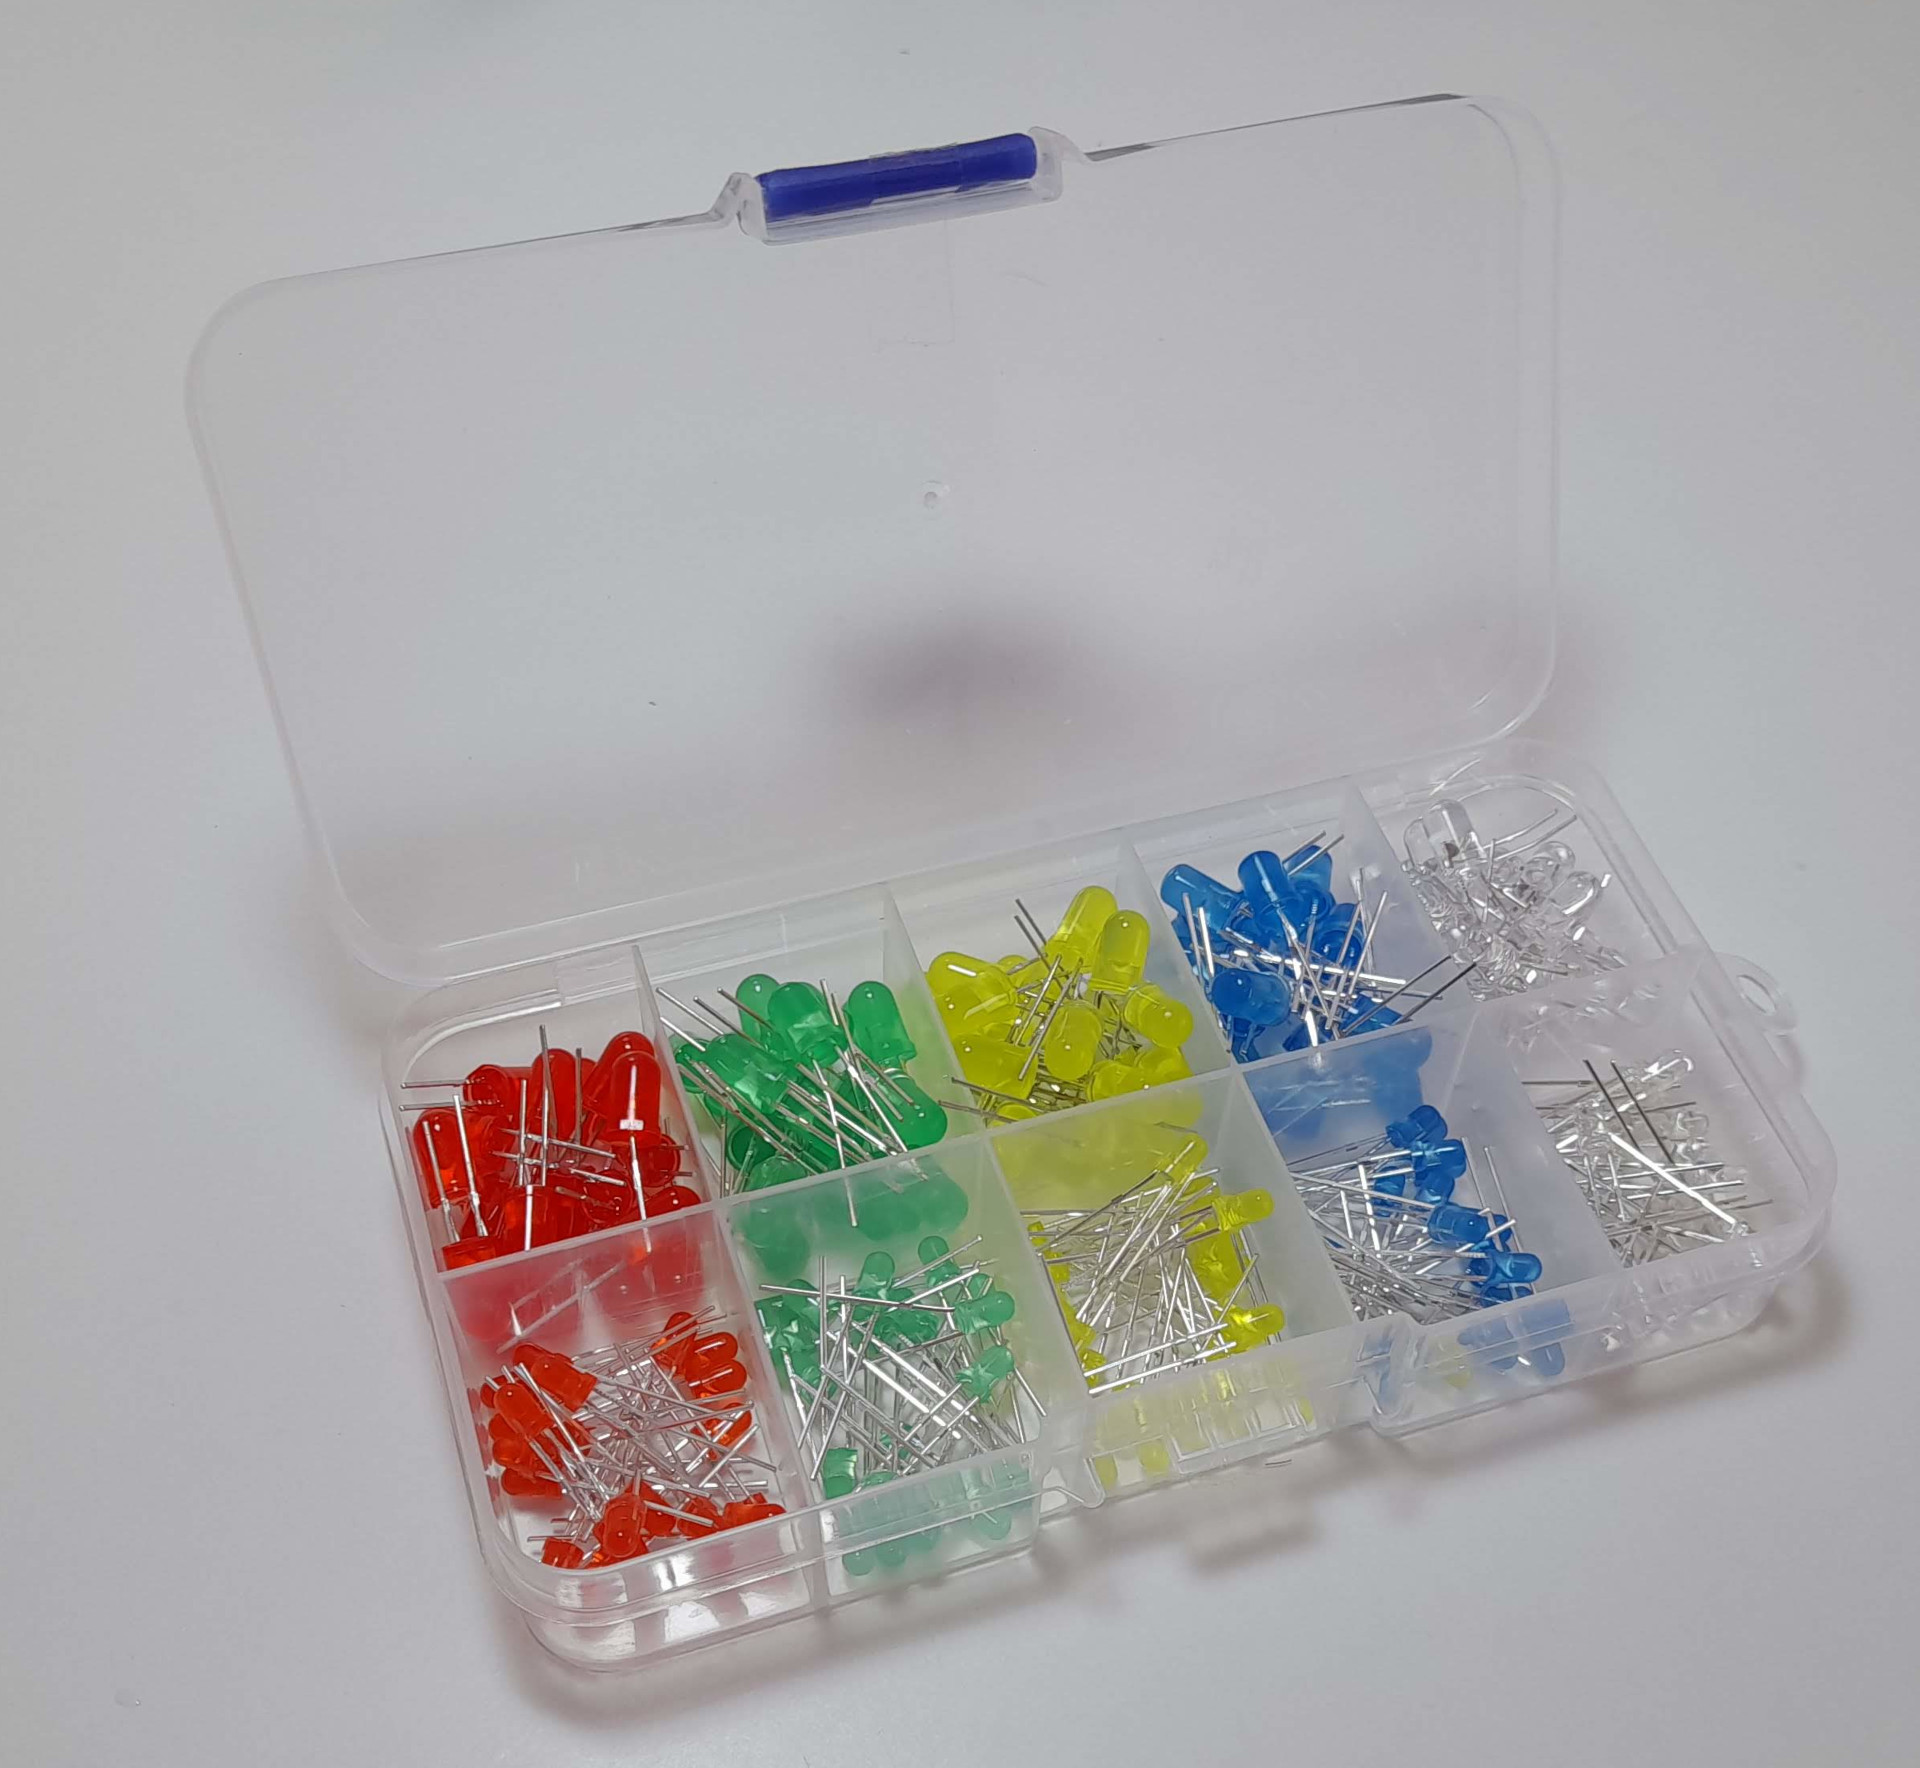 An organized transparent case containing LEDs of various colors